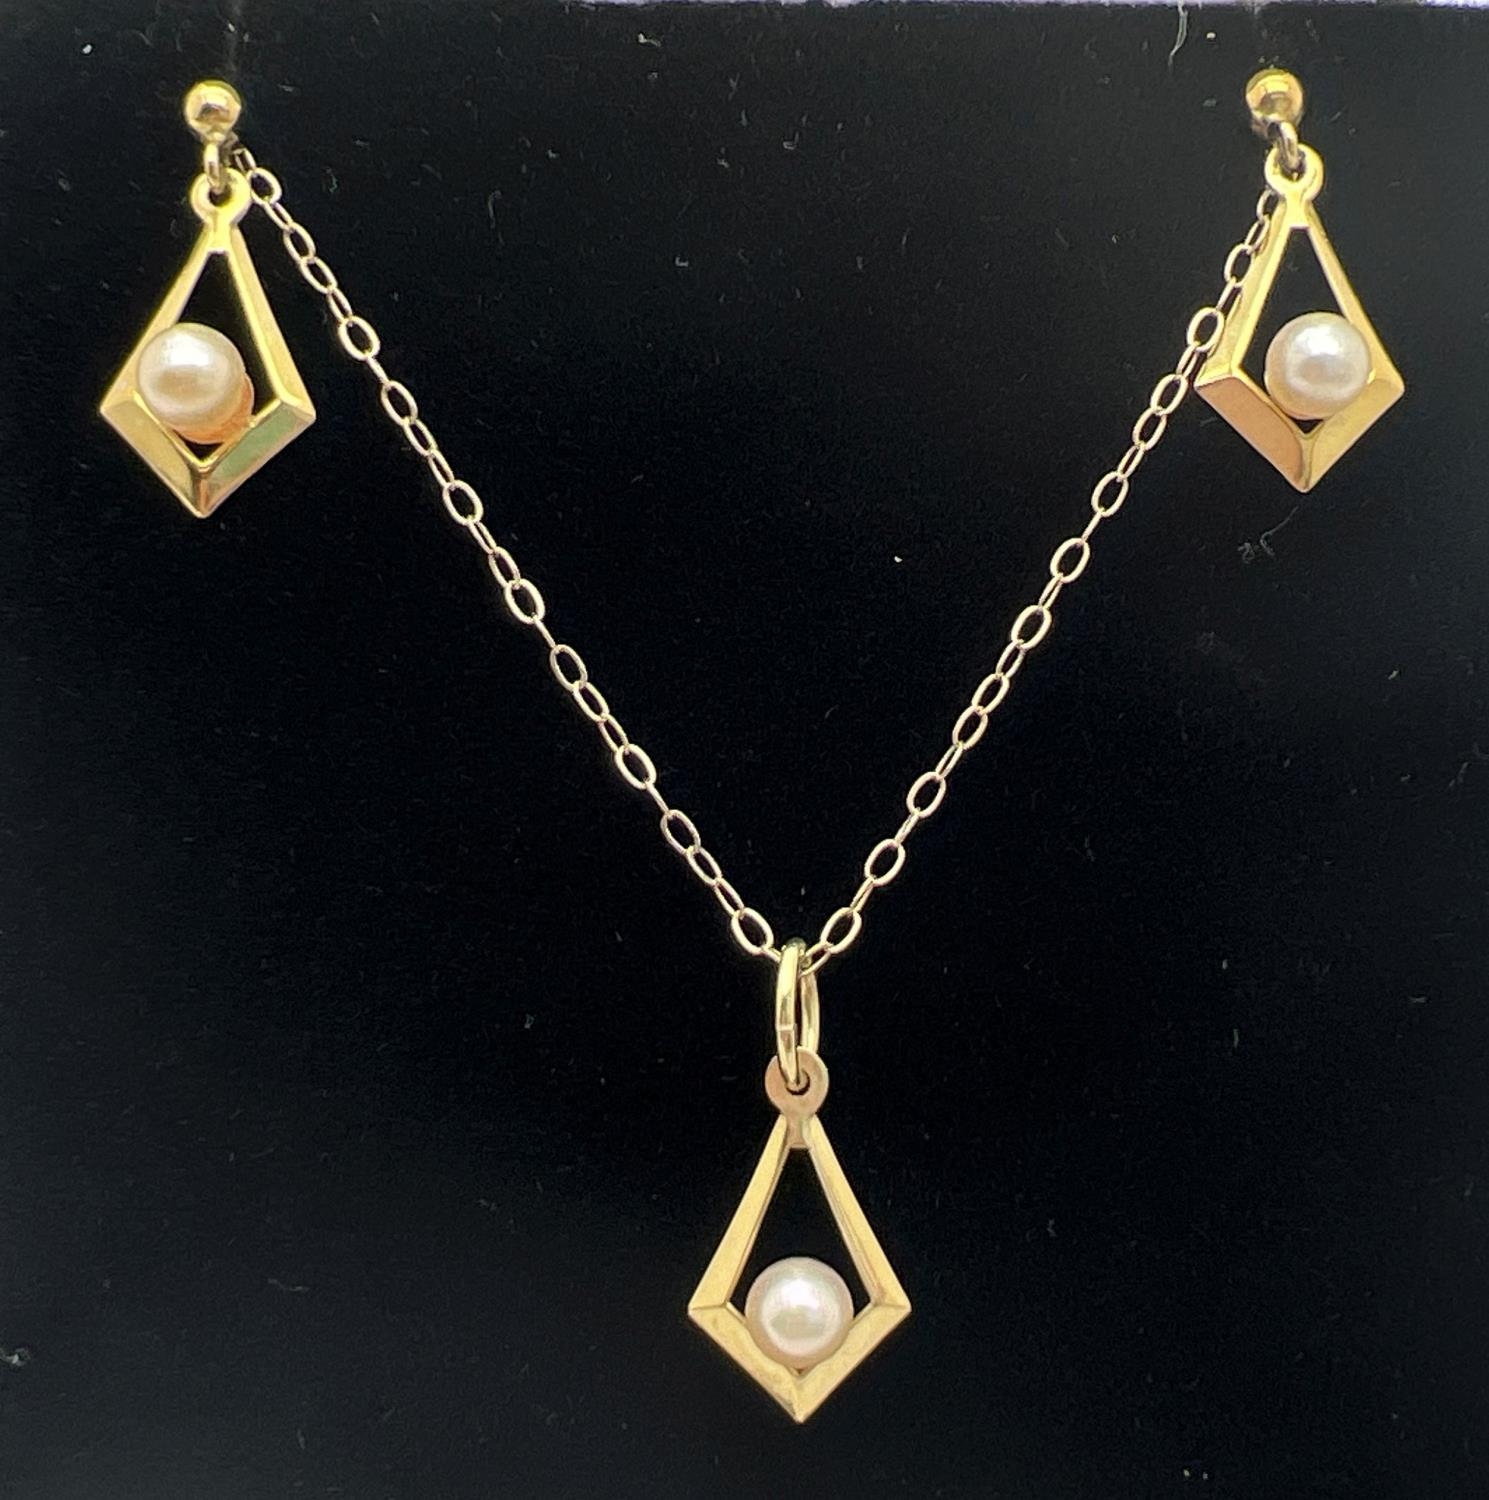 A 9ct gold and pearl pendant with matching drop earrings. Pendant on an 18" fine belcher chain